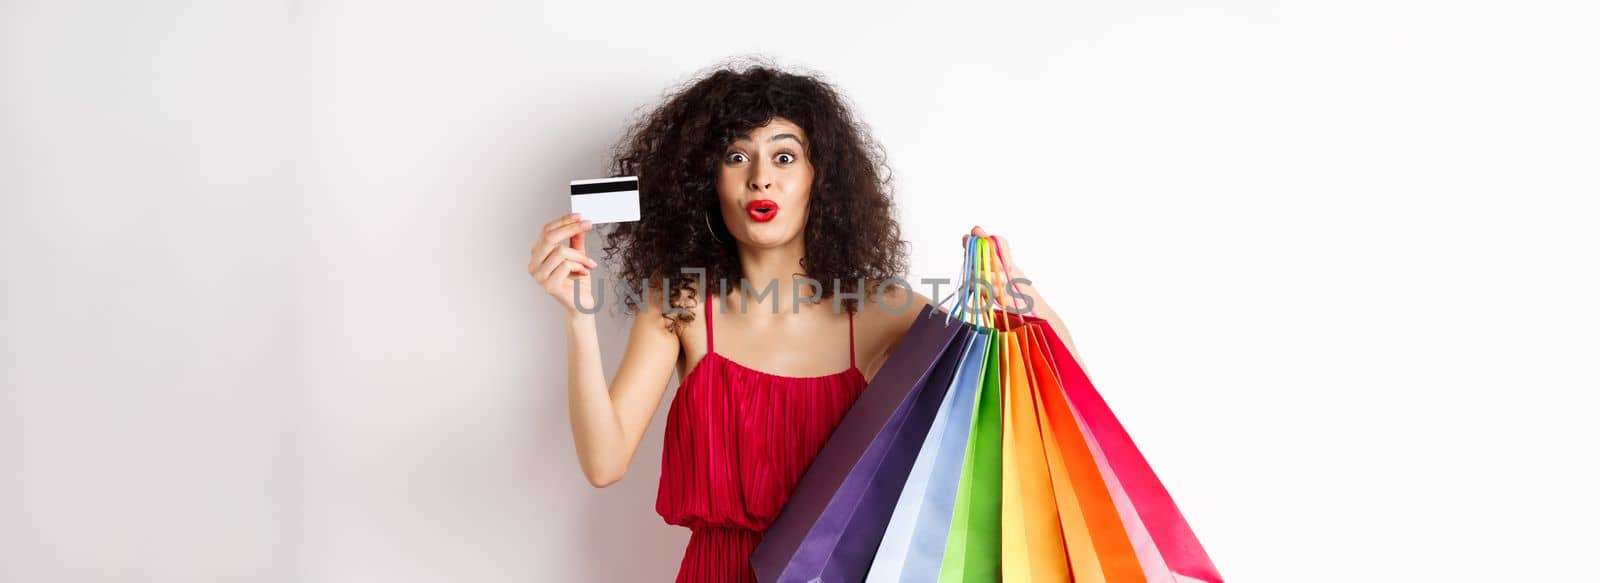 Excited woman in red dress, holding shopping bags and showing plastic credit card, shop with discounts, white background by Benzoix